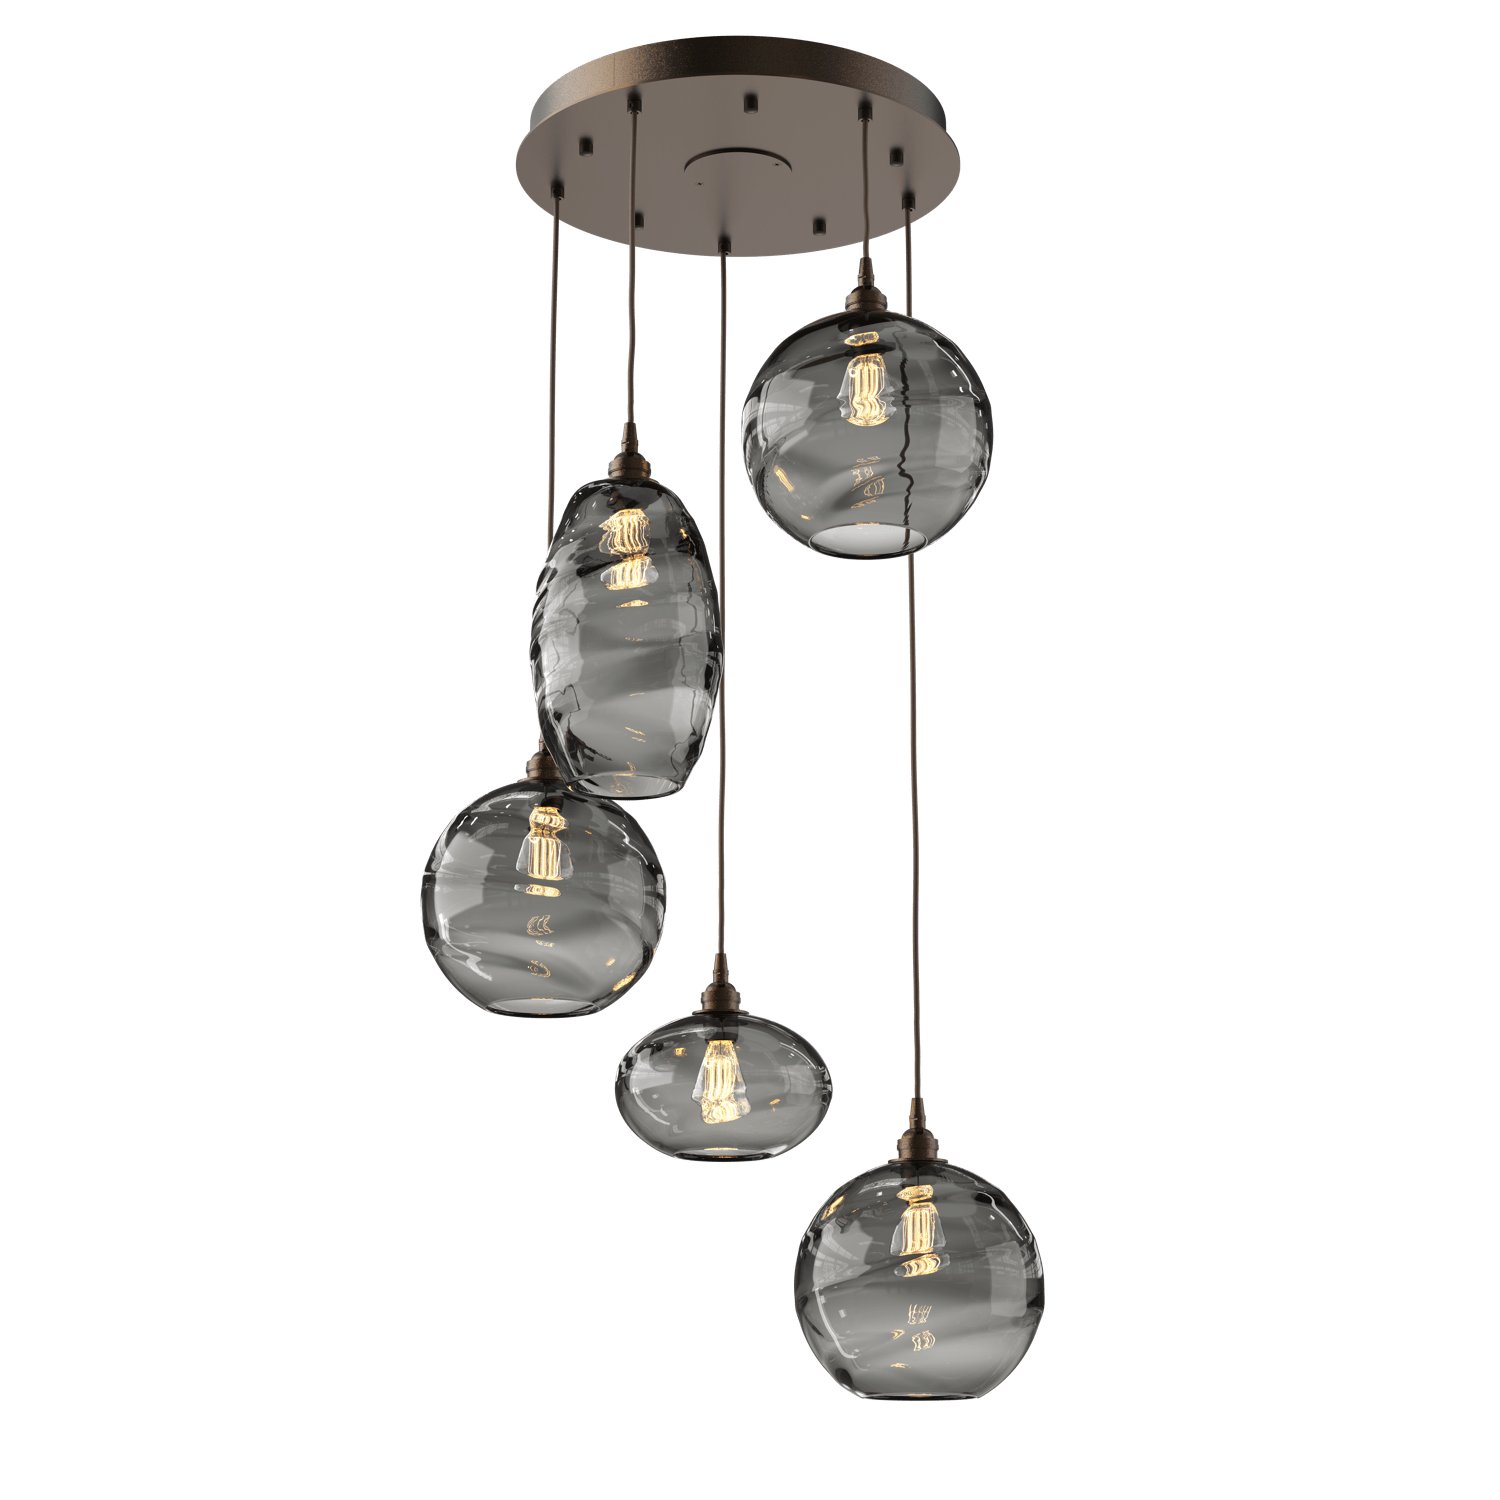 CHB0048-05-FB-OS-Hammerton-Studio-Optic-Blown-Glass-Misto-5-light-round-pendant-chandelier-with-flat-bronze-finish-and-optic-smoke-blown-glass-shades-and-incandescent-lamping